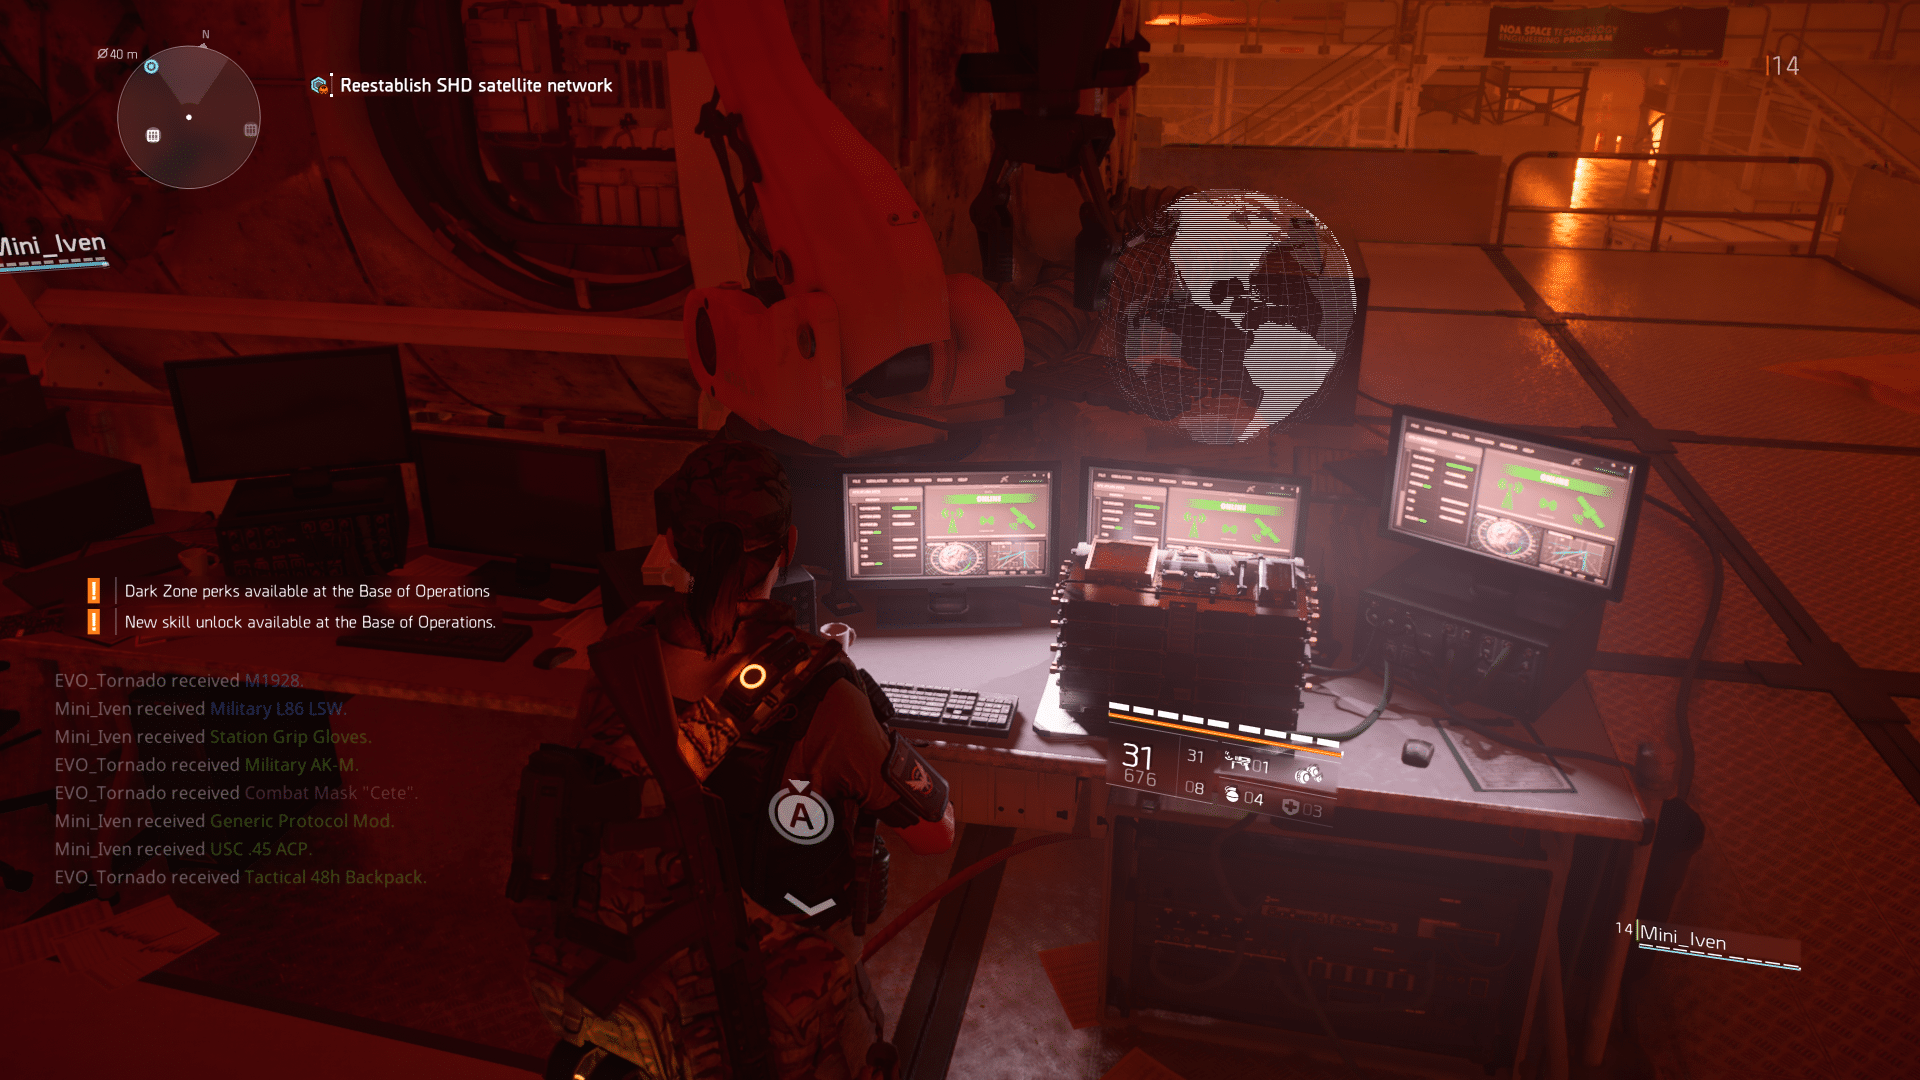 TheDivision2 4 1 2019 9 25 02 PM 729